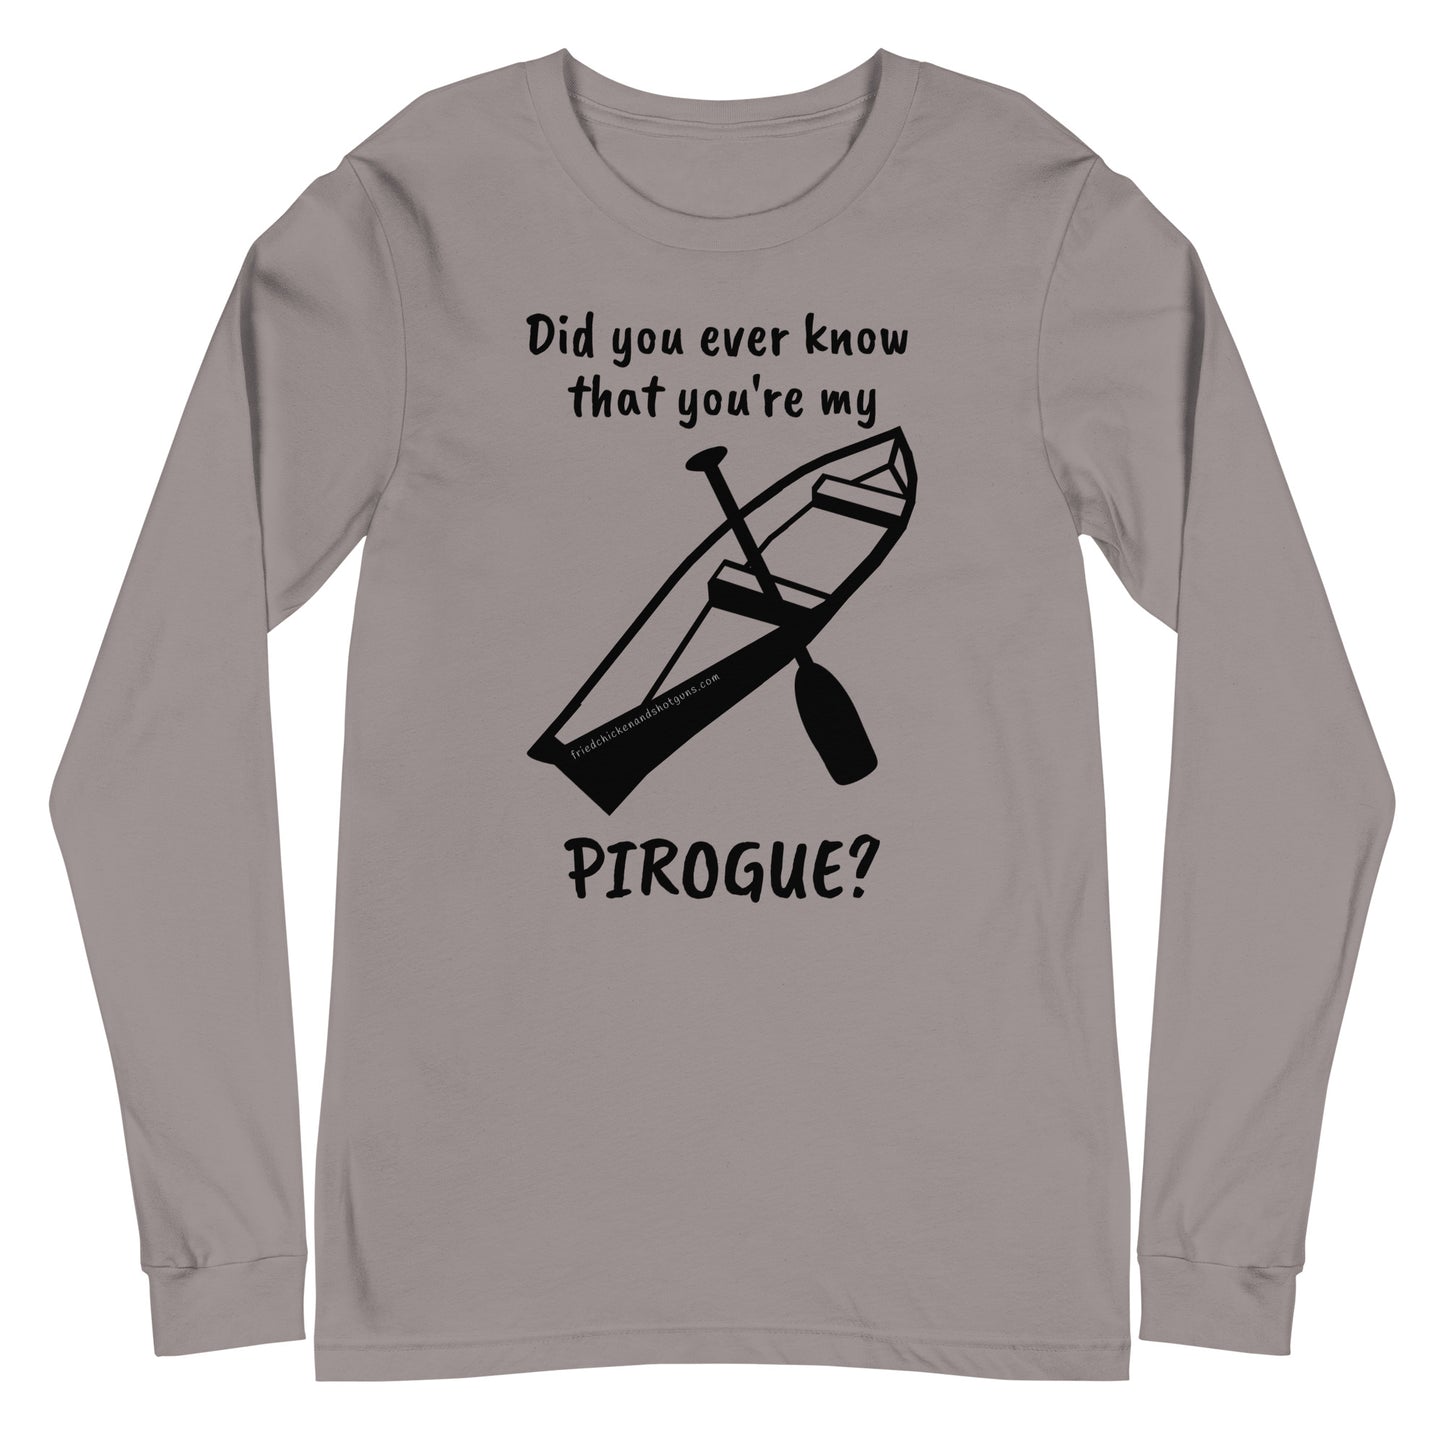 Did you ever know that you're my PIROGUE? (long sleeve/dark logo)